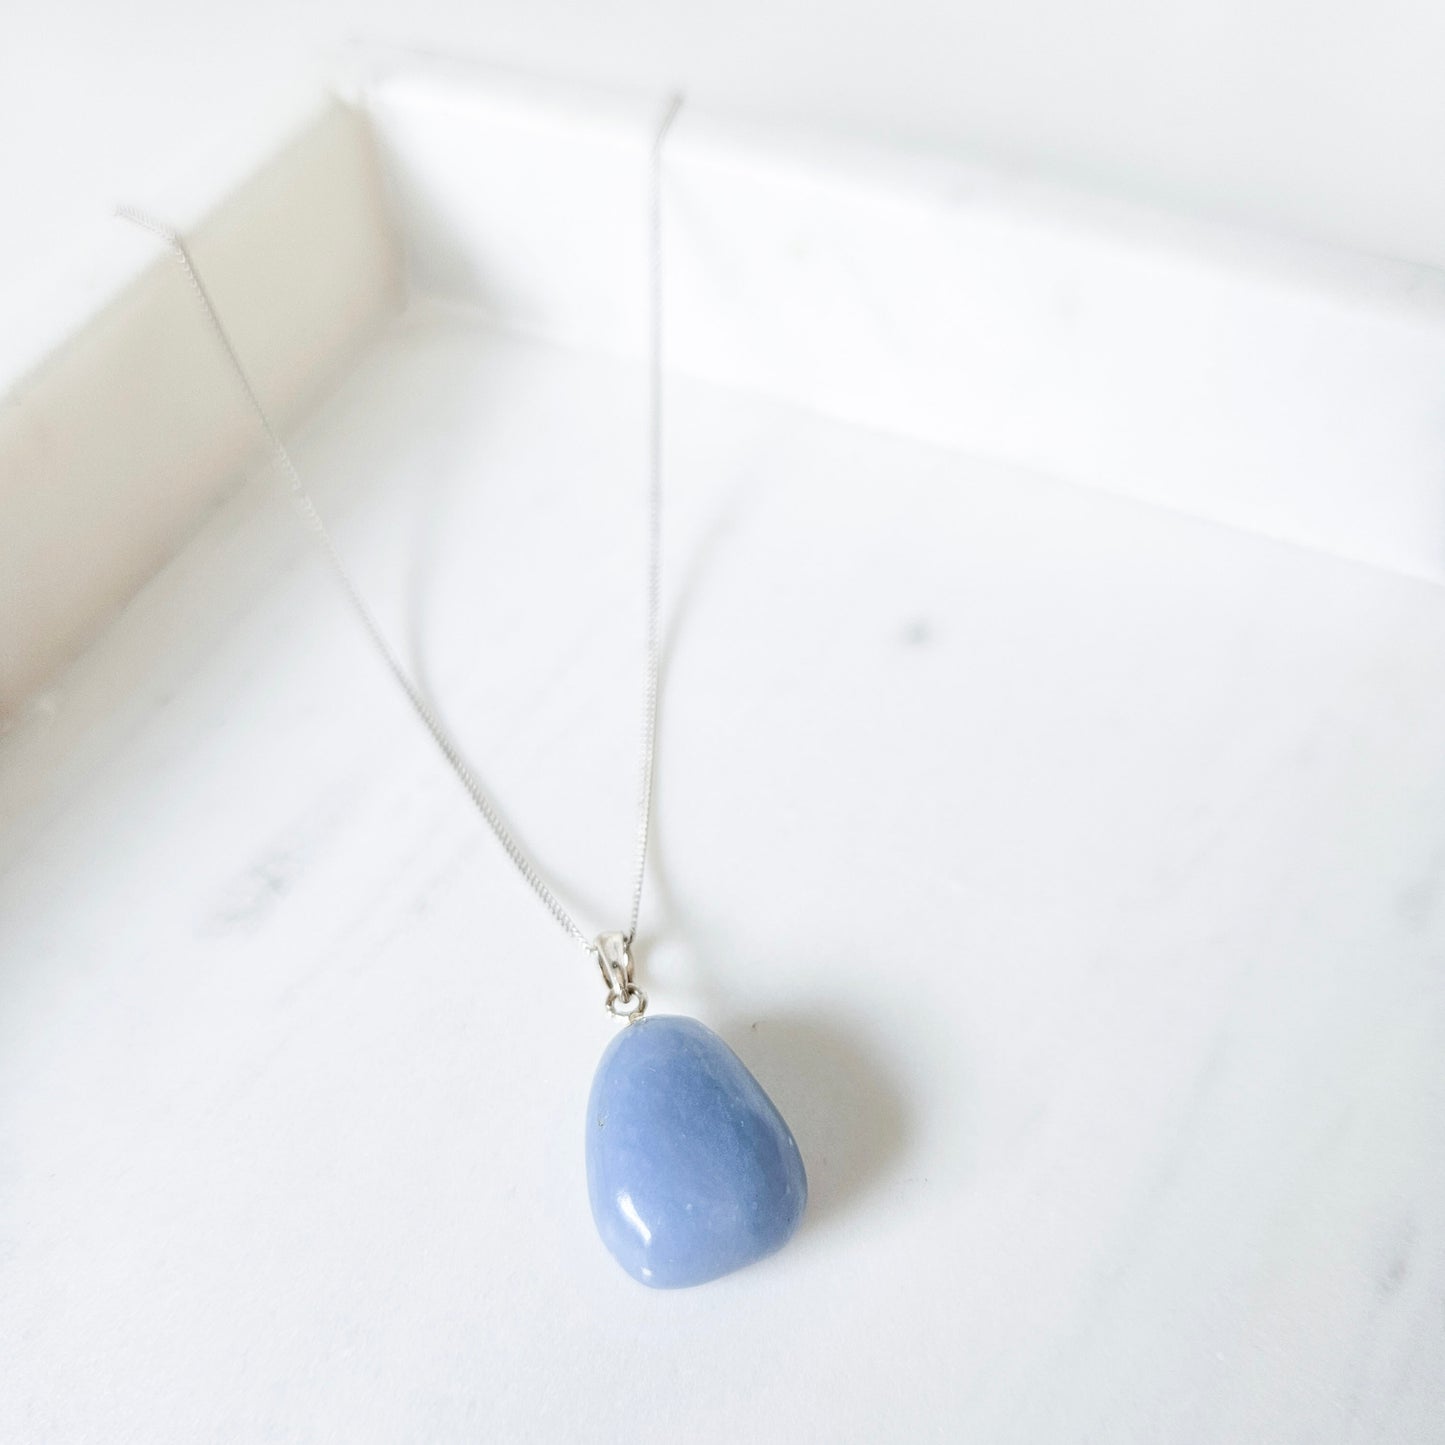 Angelite Crystal Necklace Pendant